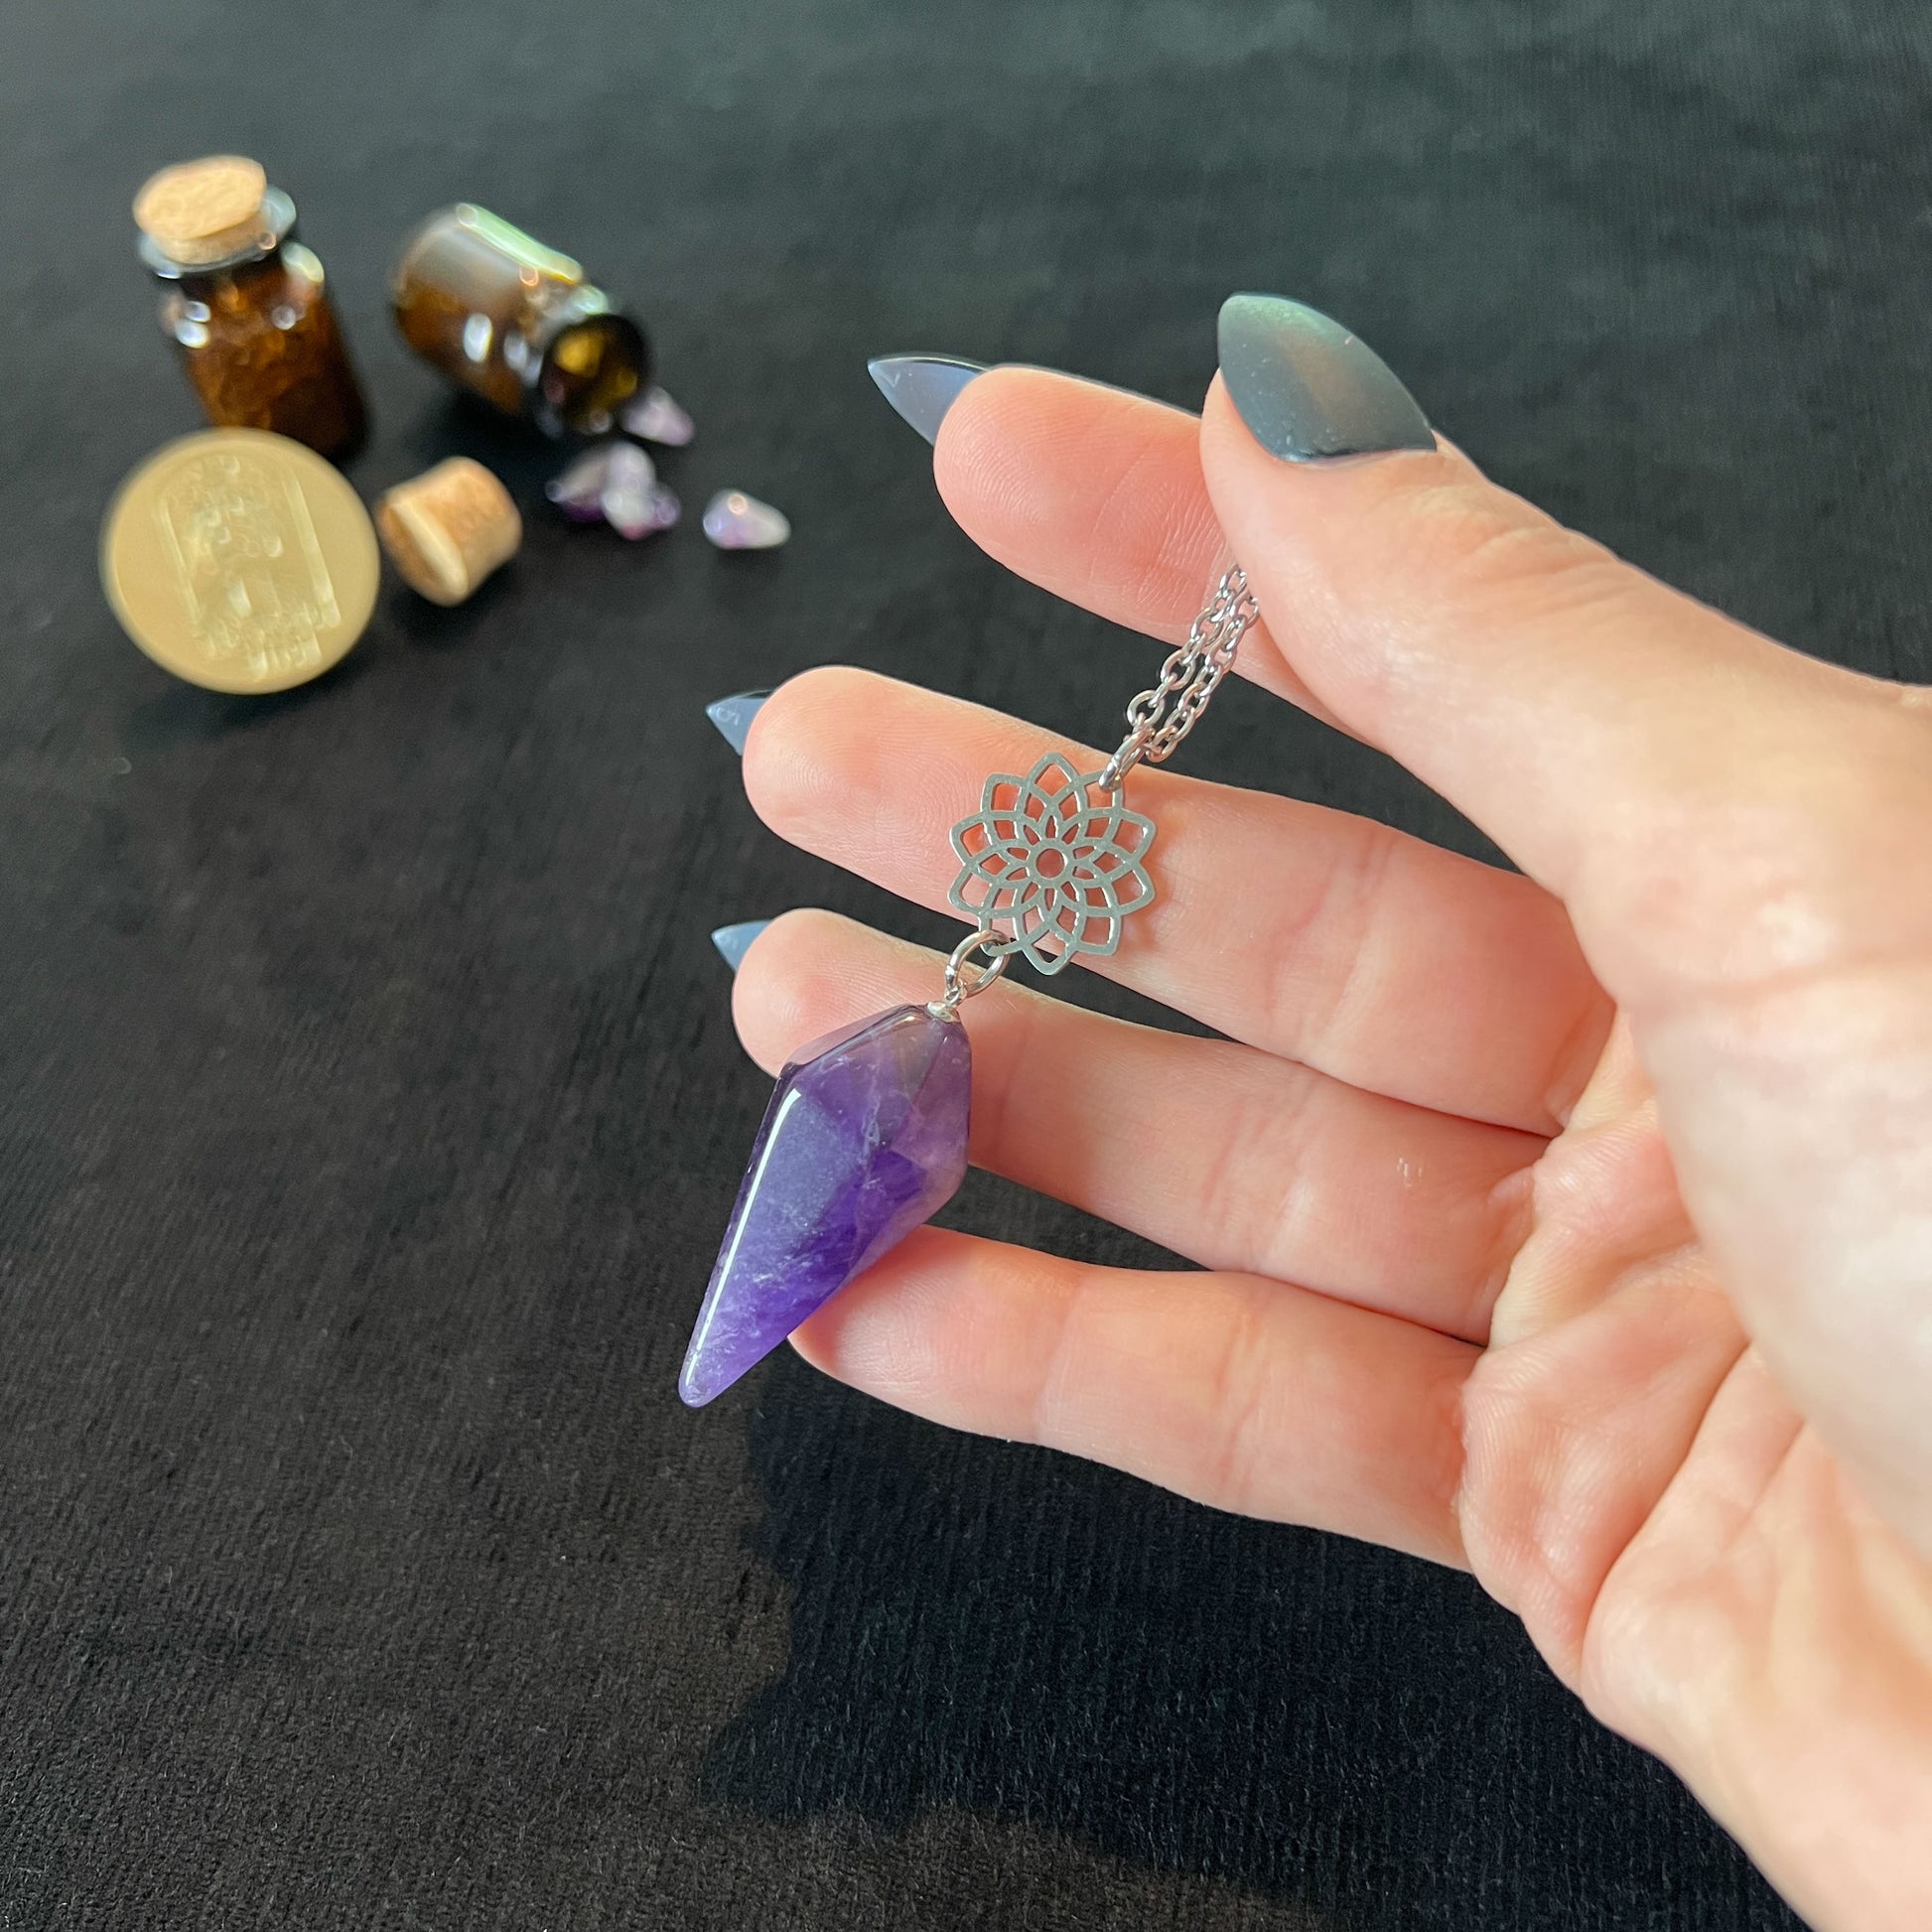 Amethyst and sacred geometry mandala pendulum necklace, stainless steel Baguette Magick